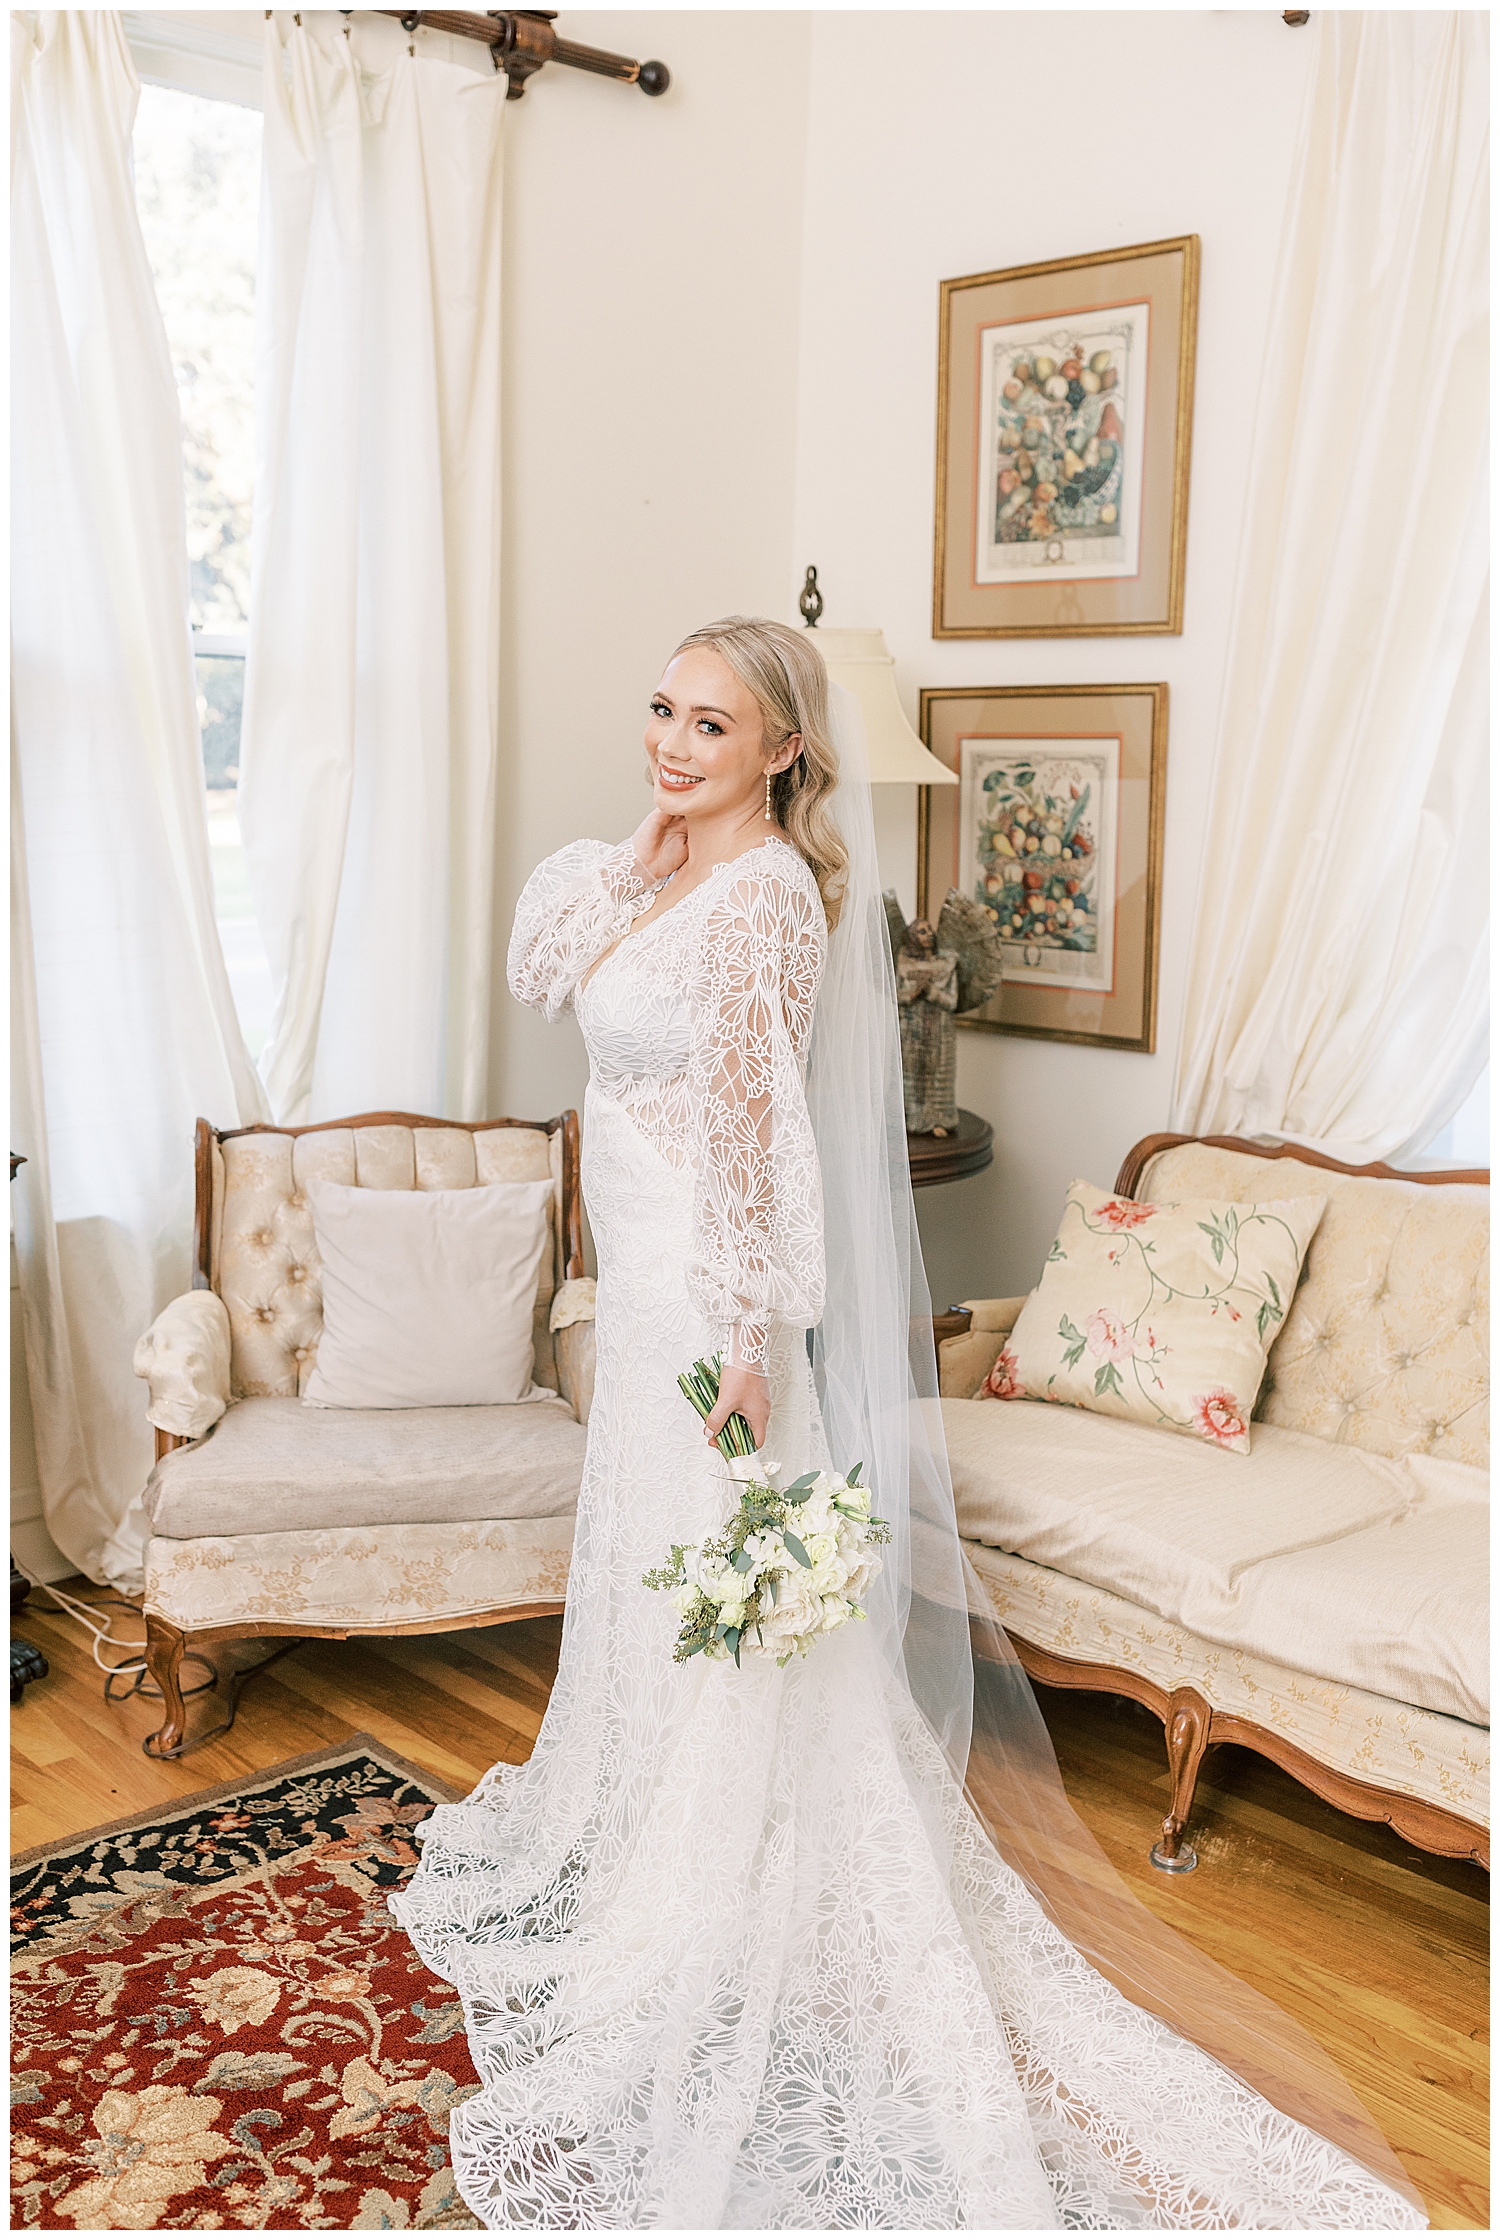 A bride stands in front of antique furniture.